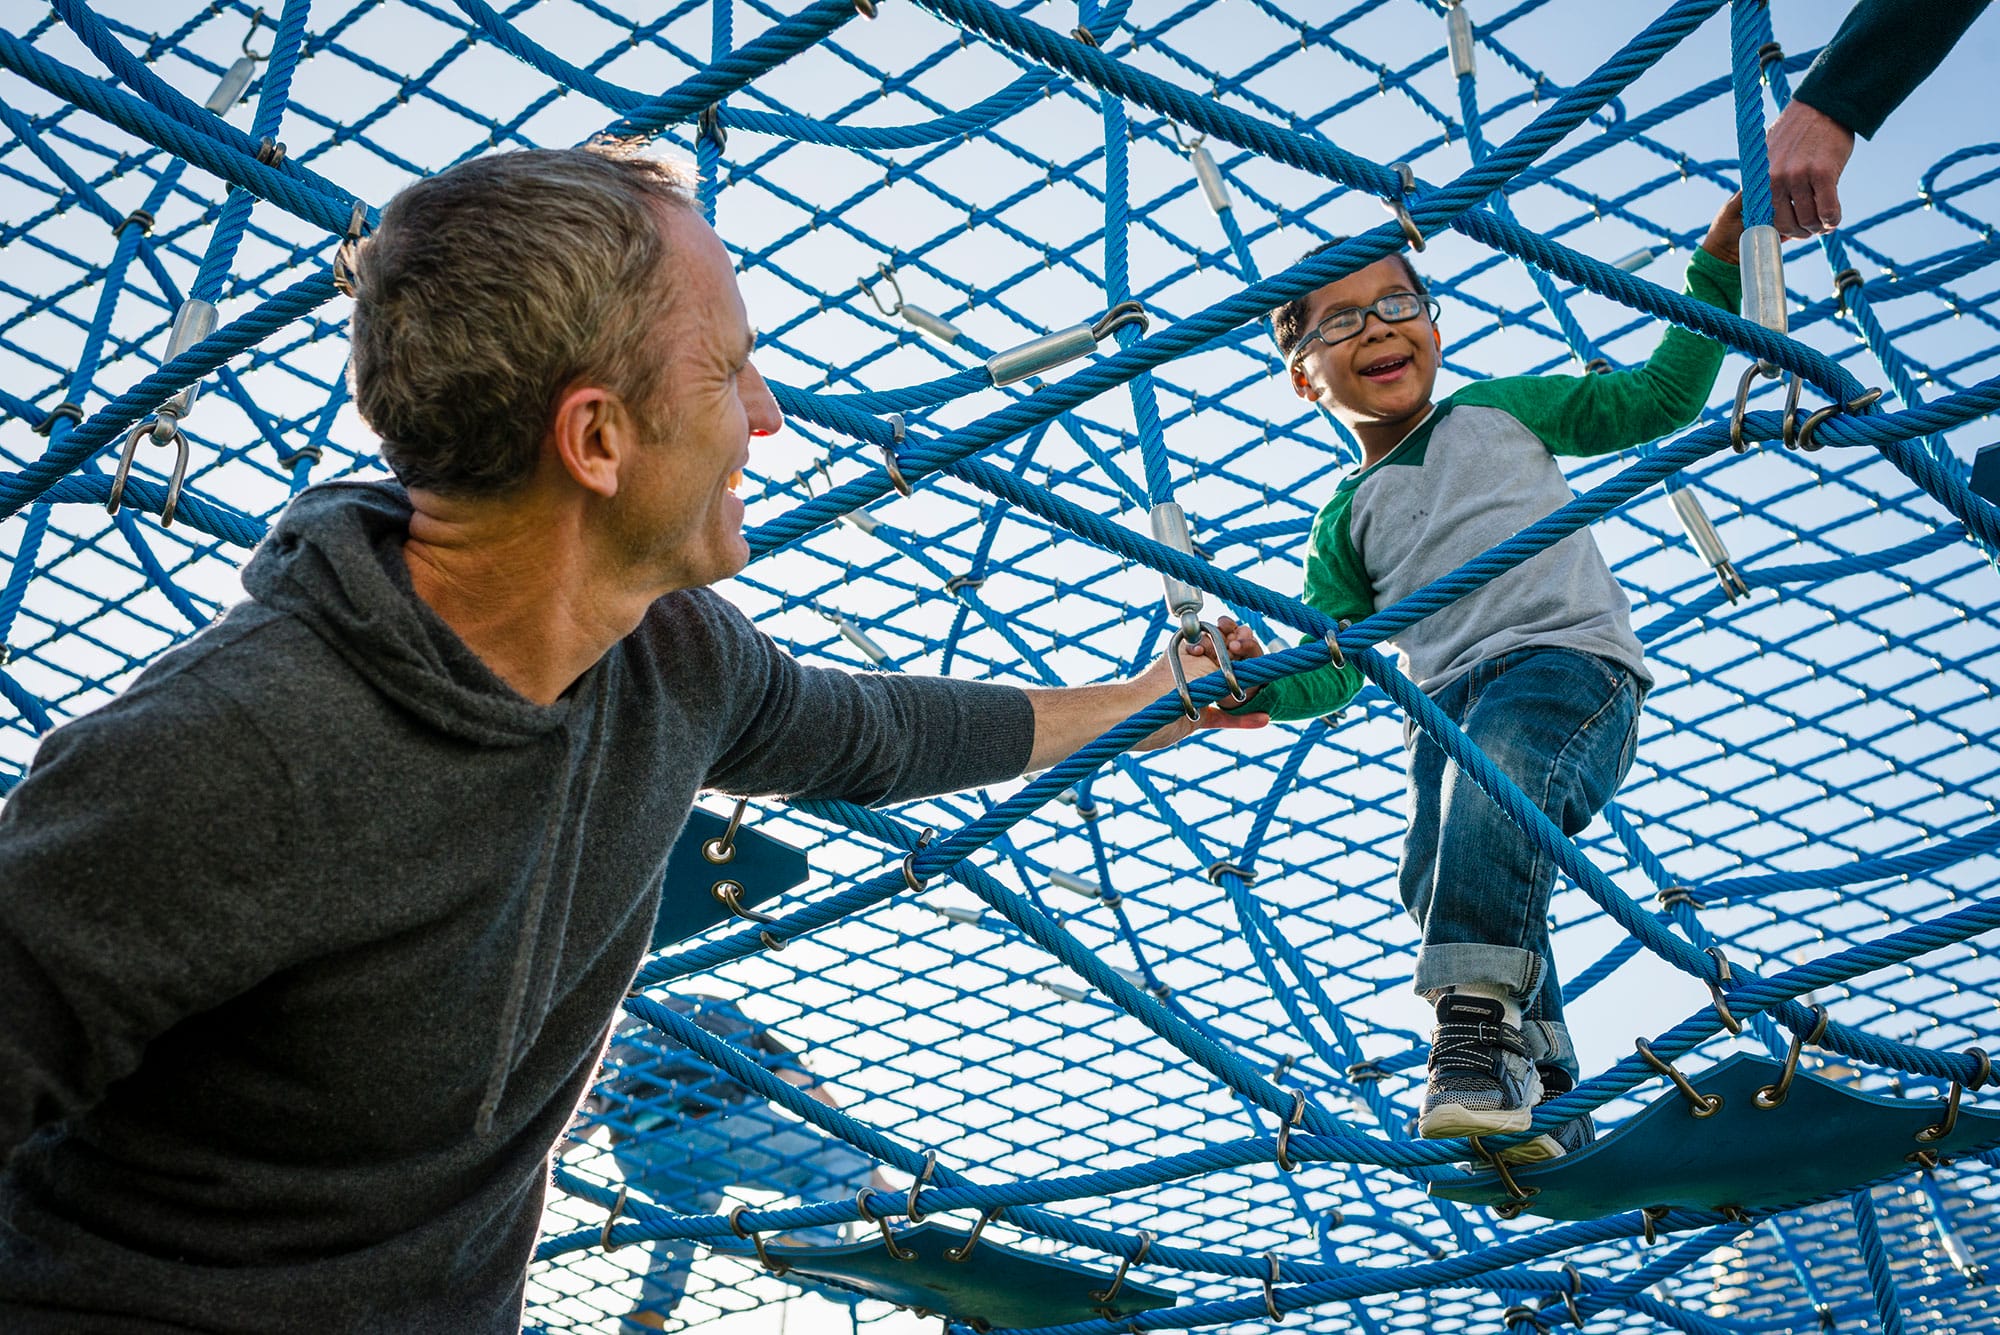 A man and a child playing on a playground.